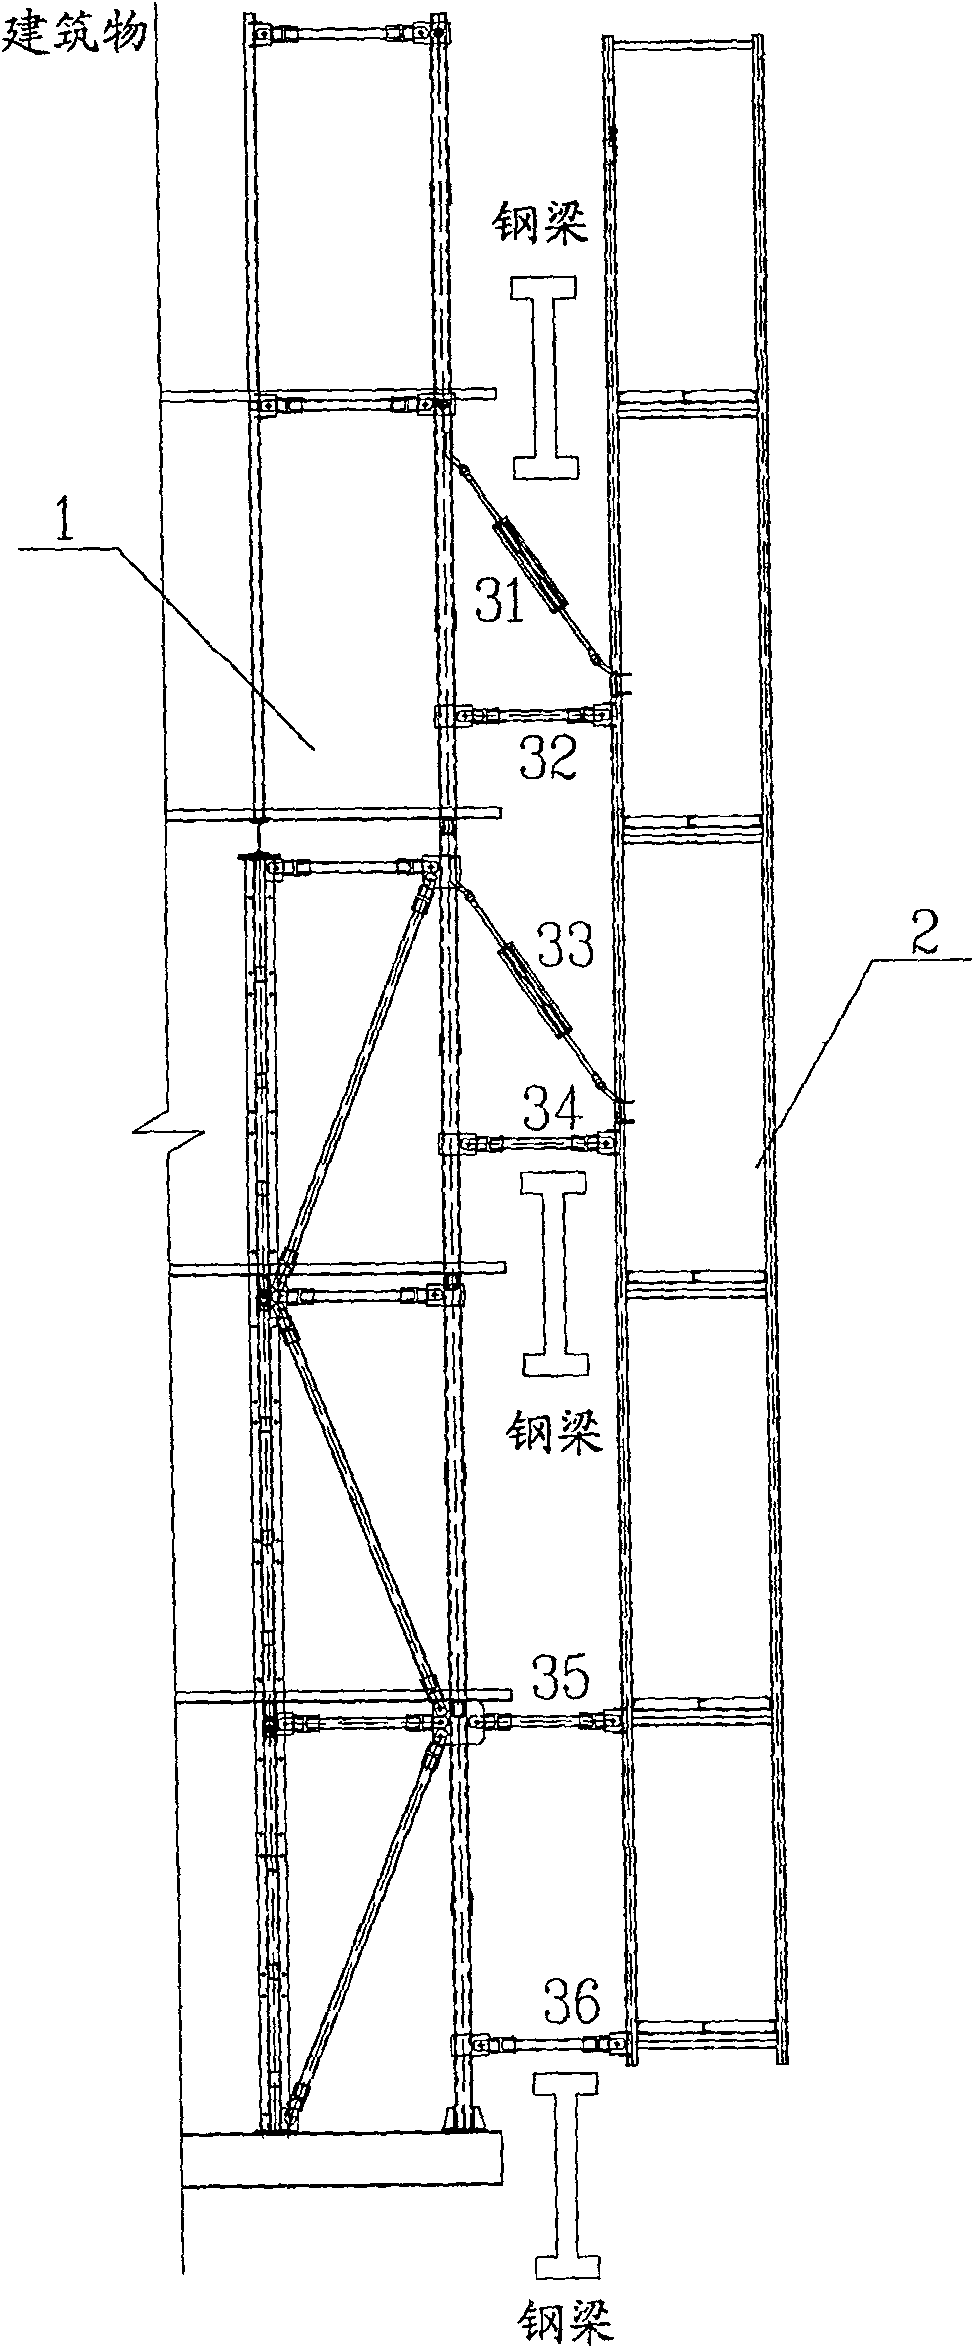 Method for throwing over barrier for climbing system for building construction